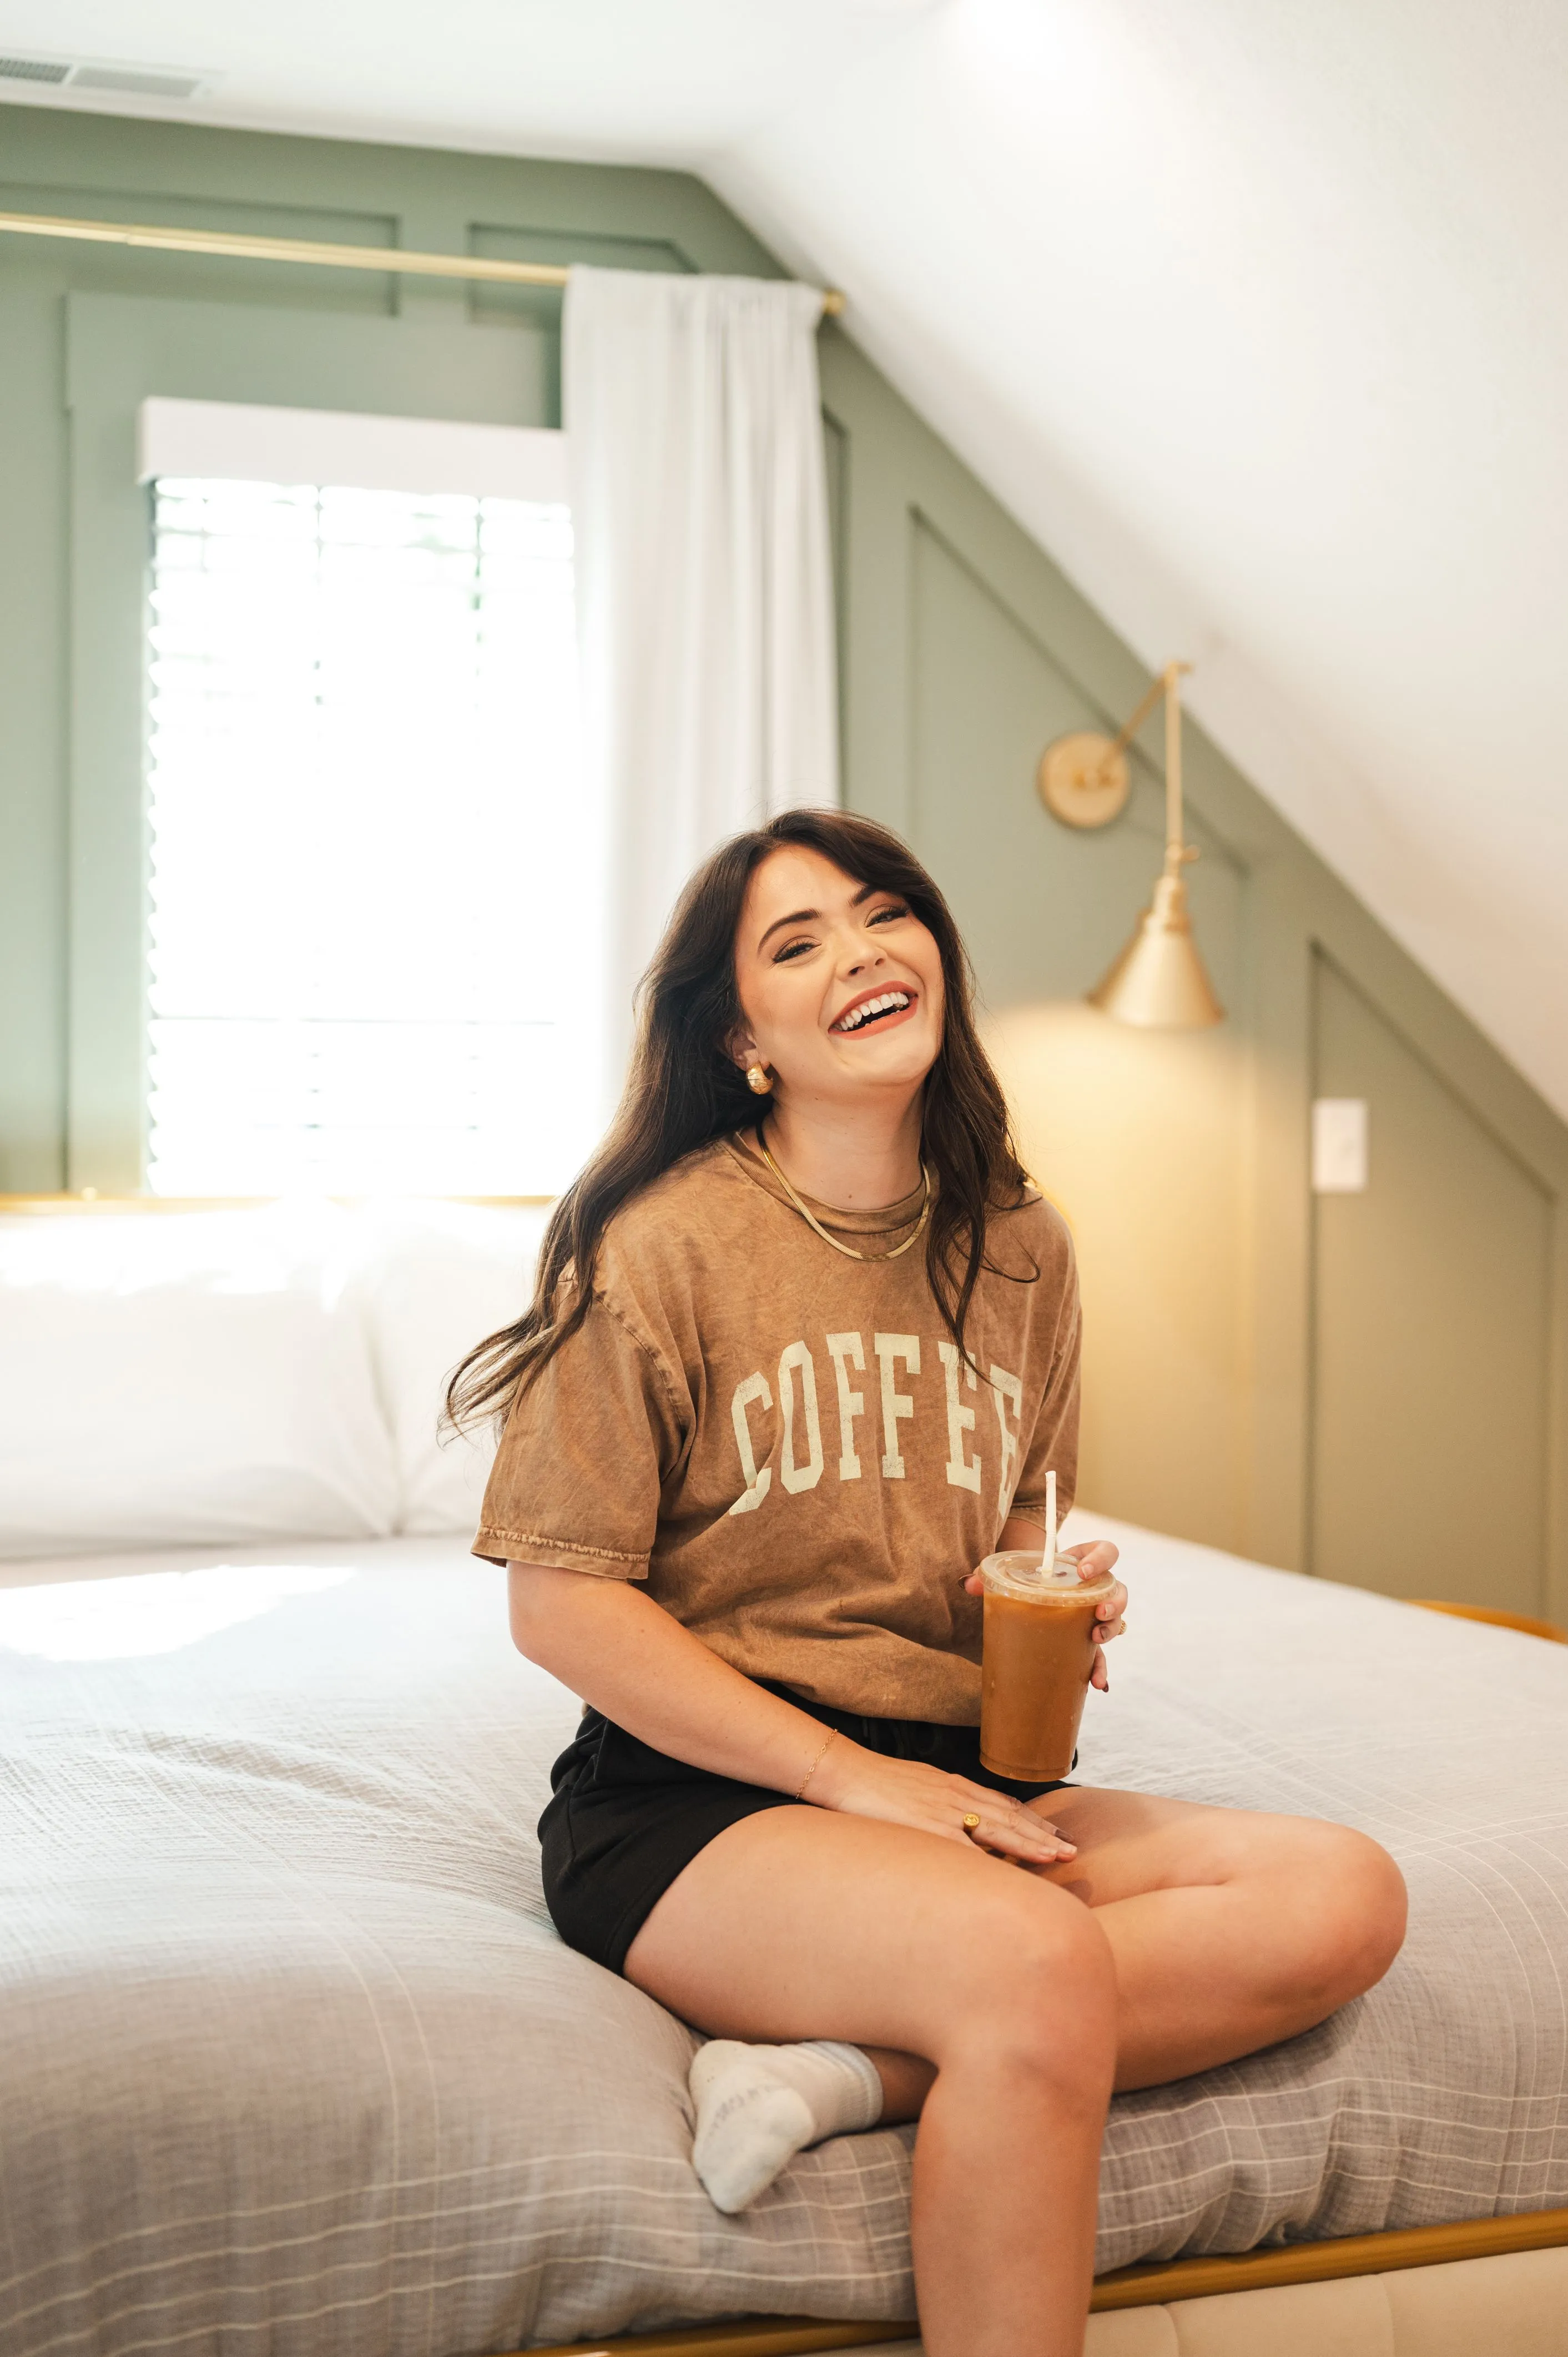 Woman sitting on a bed, laughing, holding an iced coffee, wearing a brown T-shirt with the word "COFFEE" on it and black shorts, in a room with green walls and white curtains.